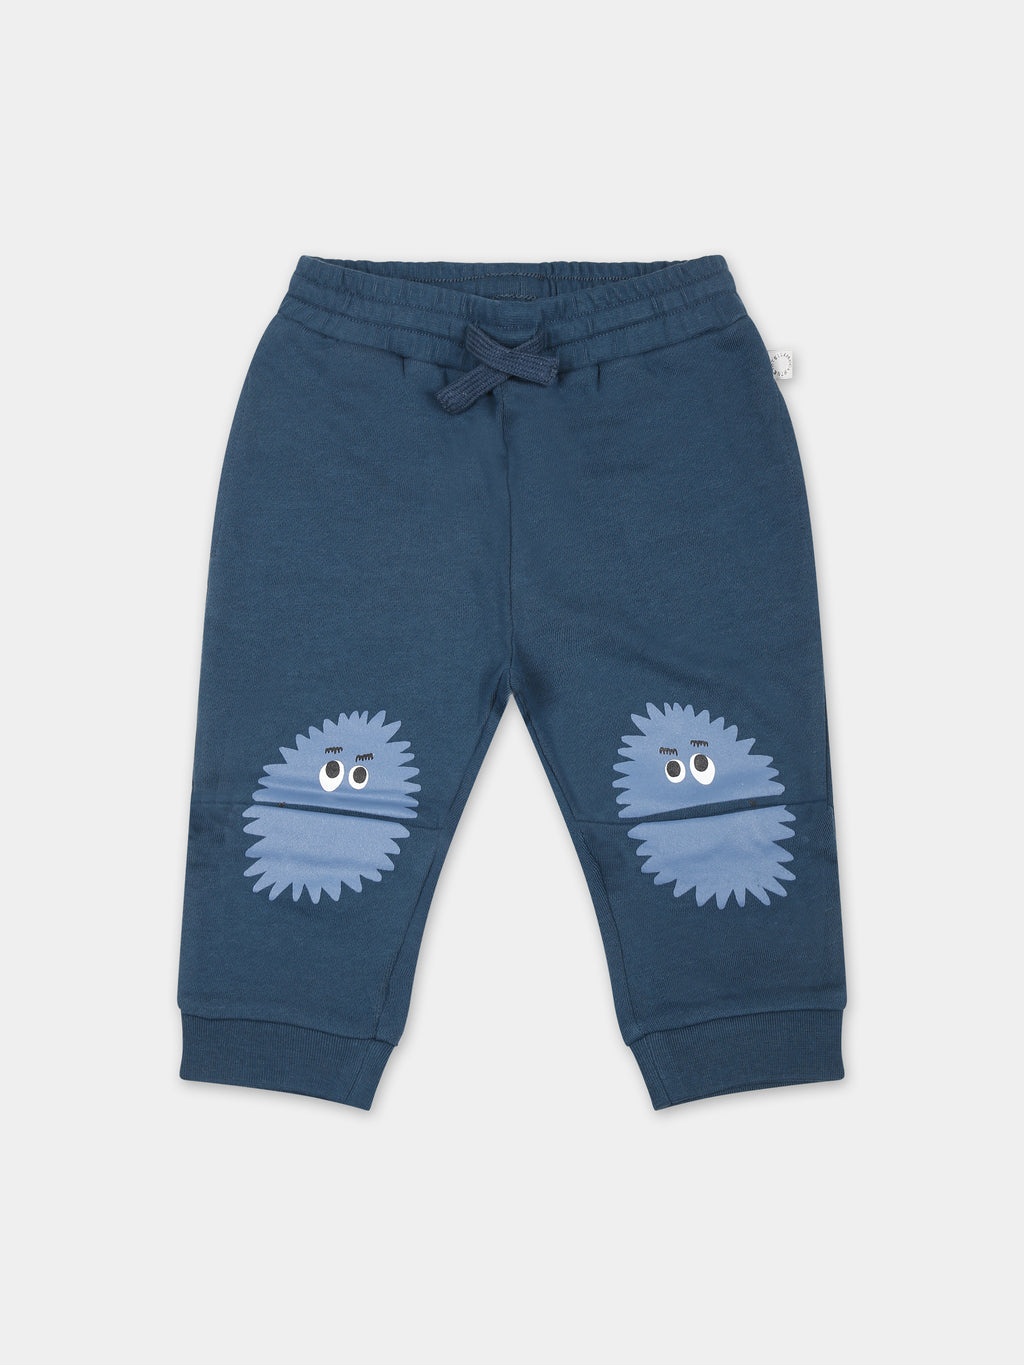 Blue trousers for baby boy with monster